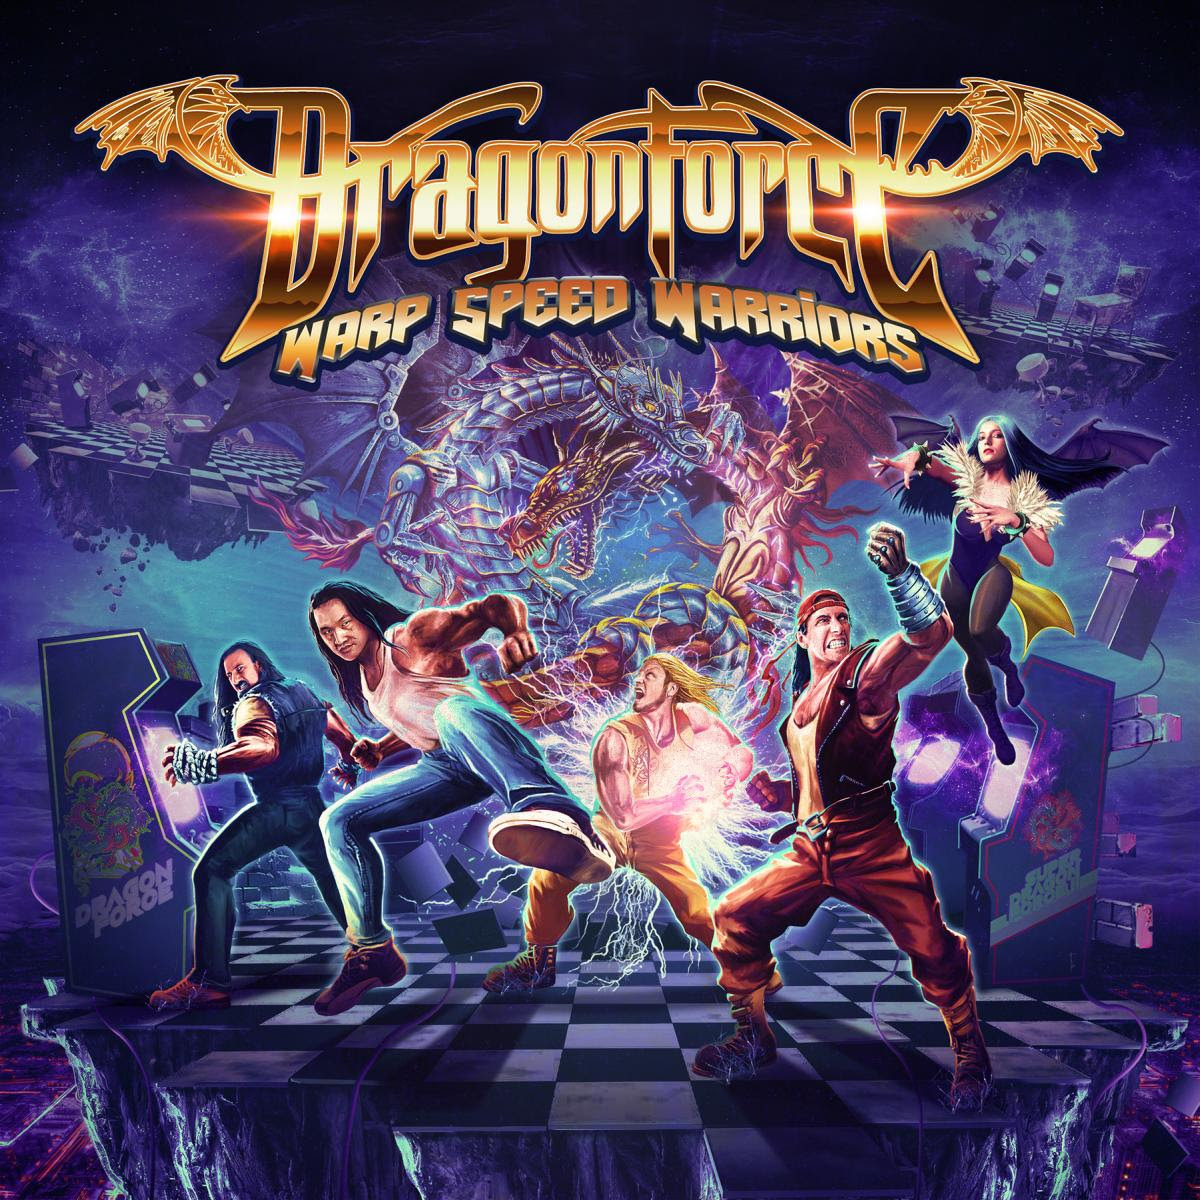 Extreme power metal legends Dragonforce sign worldwide contract